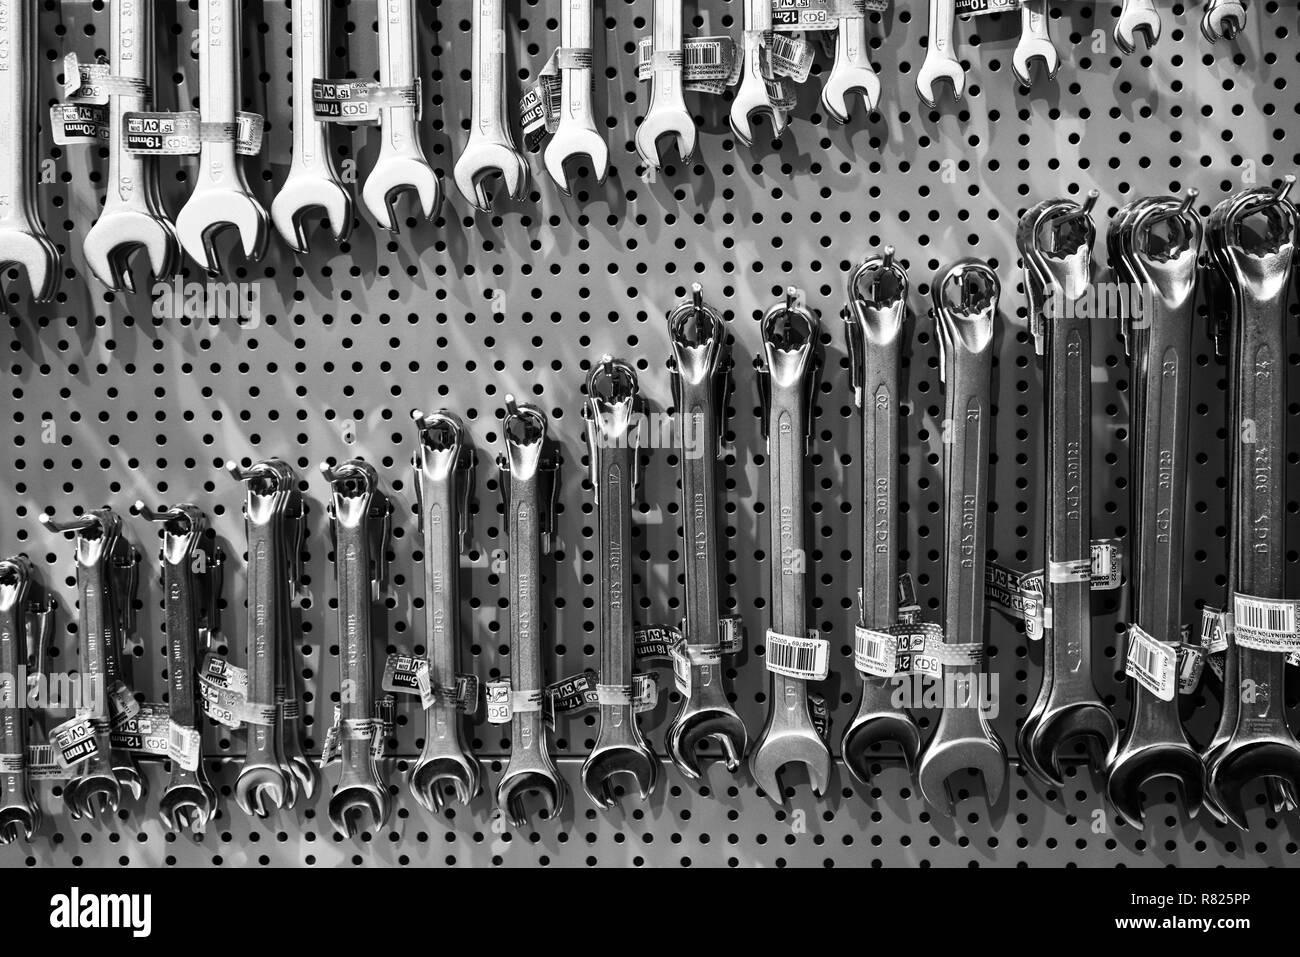 Various open-end spanners, open-end spanners, assorted on metal wall, Switzerland Stock Photo